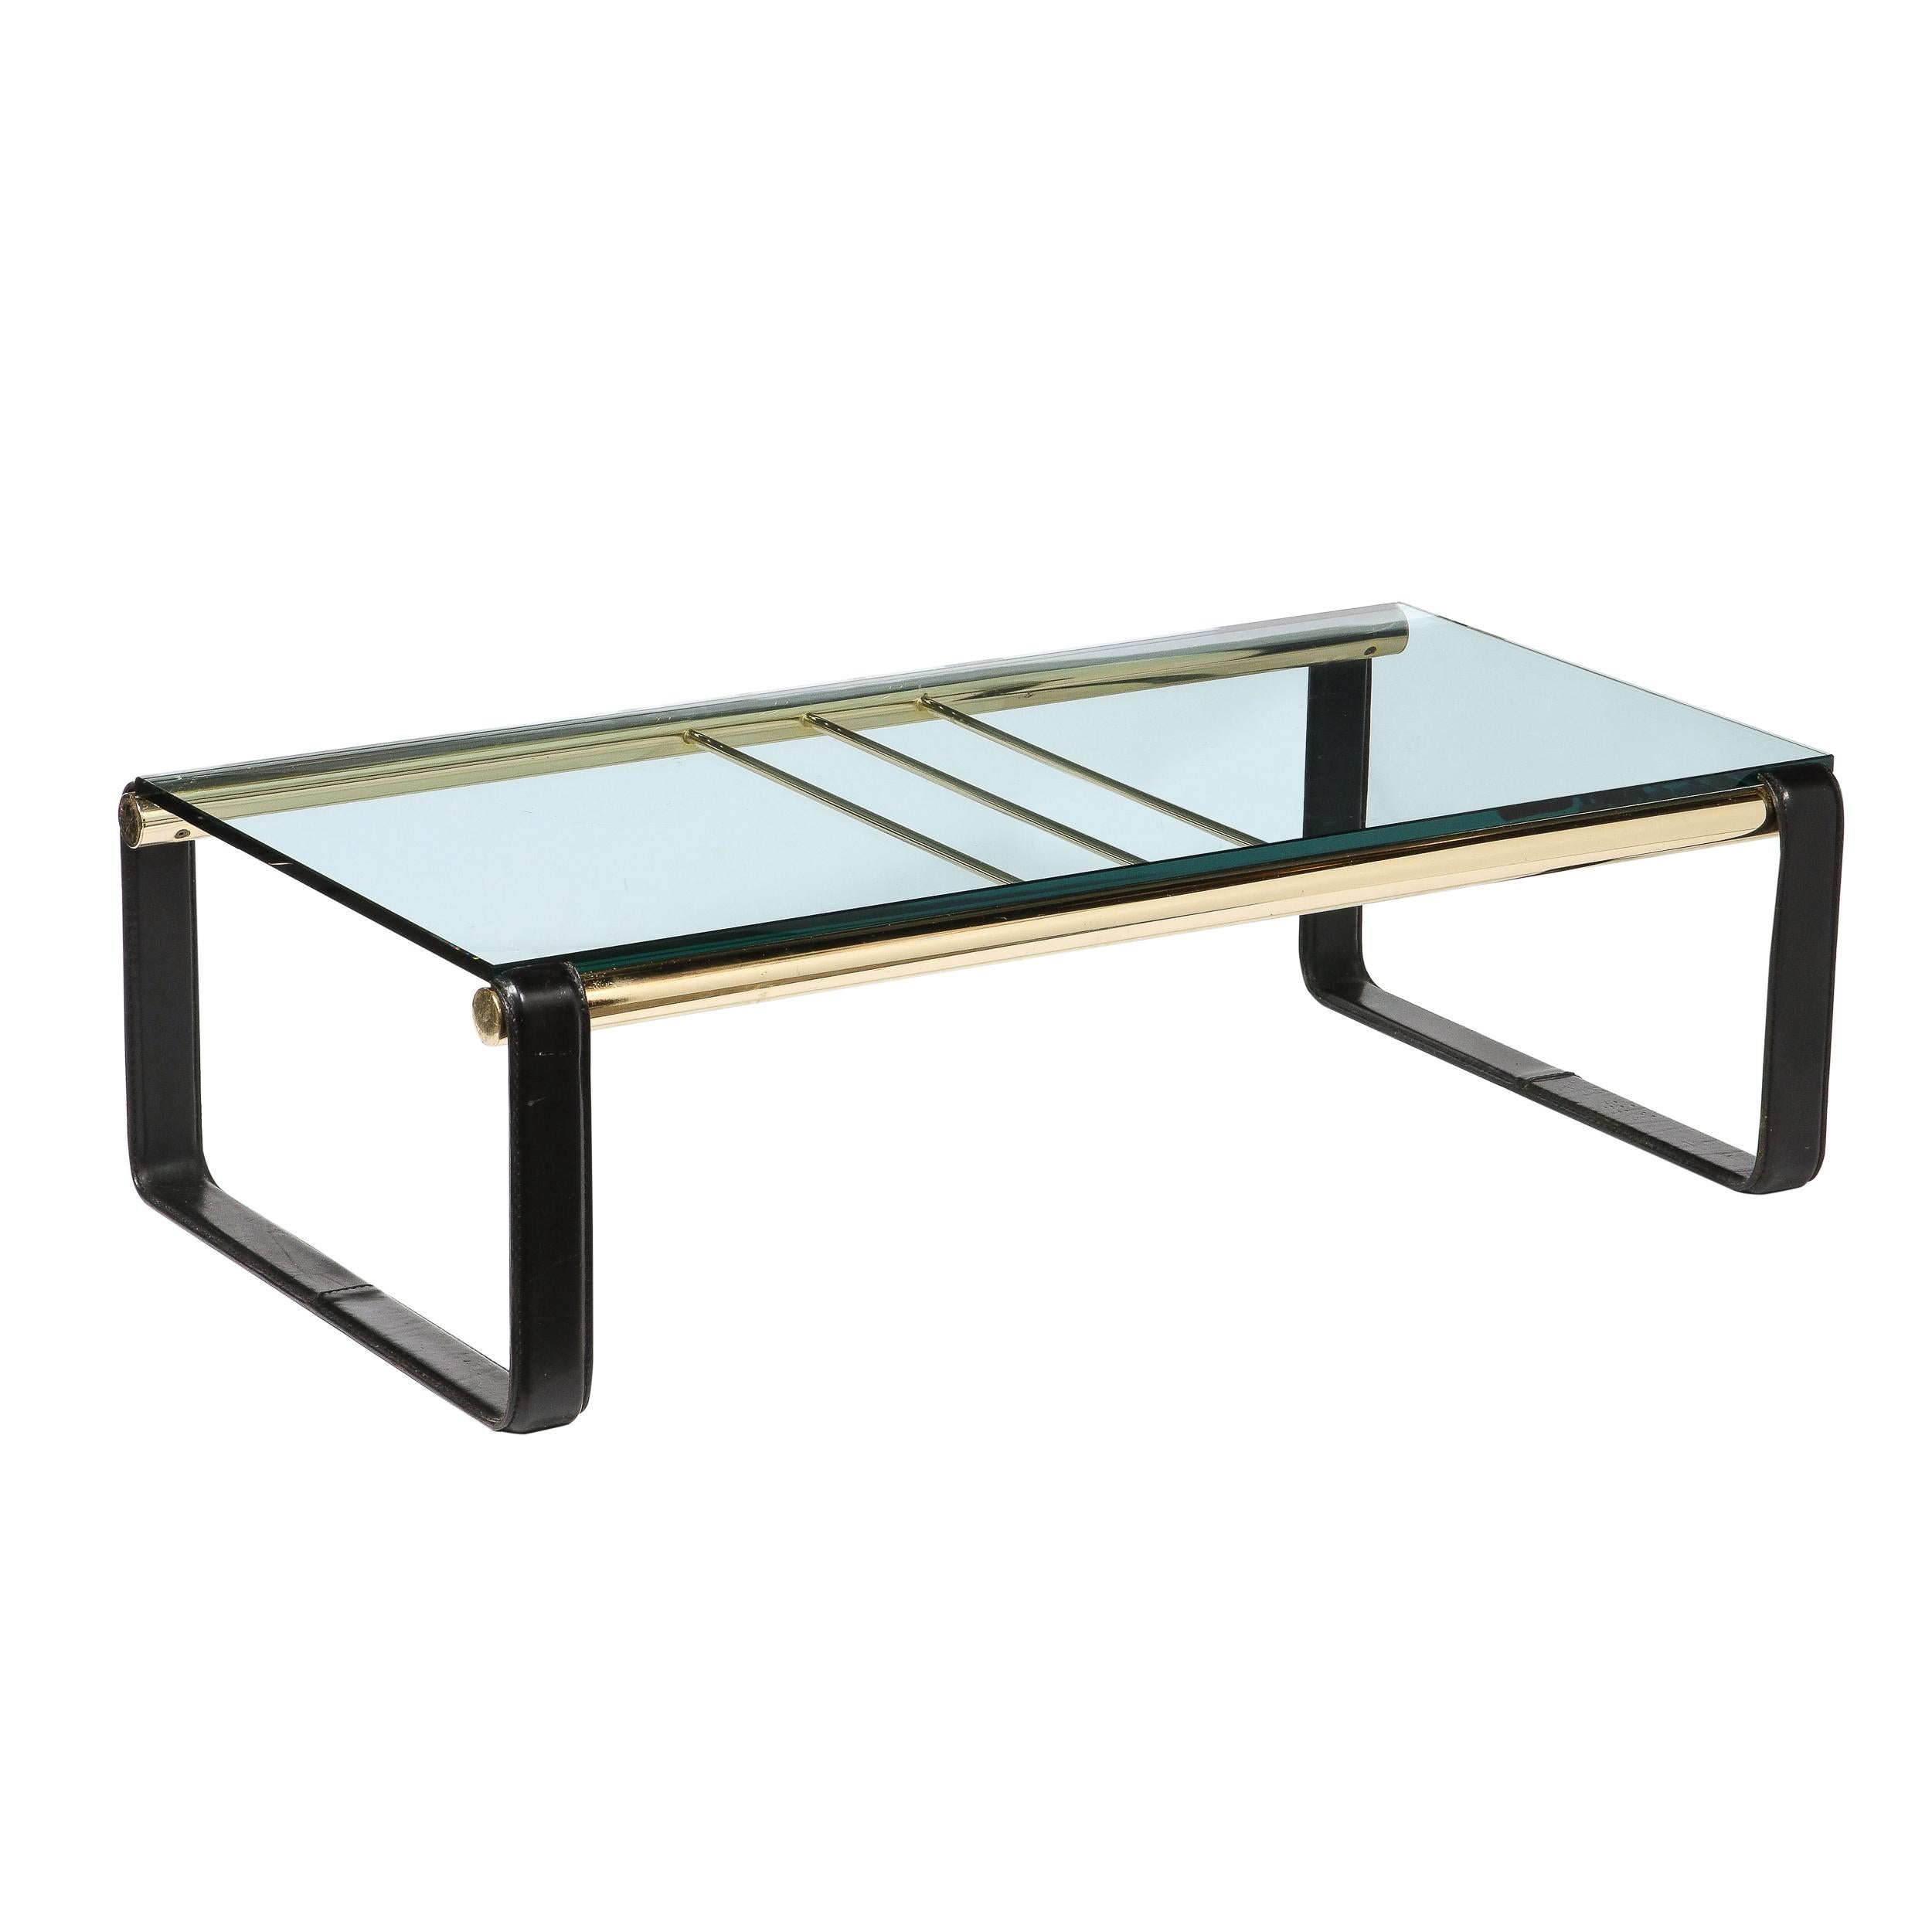 This elegant Mid-Century Modern cocktail table was realized in Denmark during the latter half of the 20th century. It features a rectangular body with rectilinear black leather supports on each end adjoined by lustrous brass cylindrical supports.